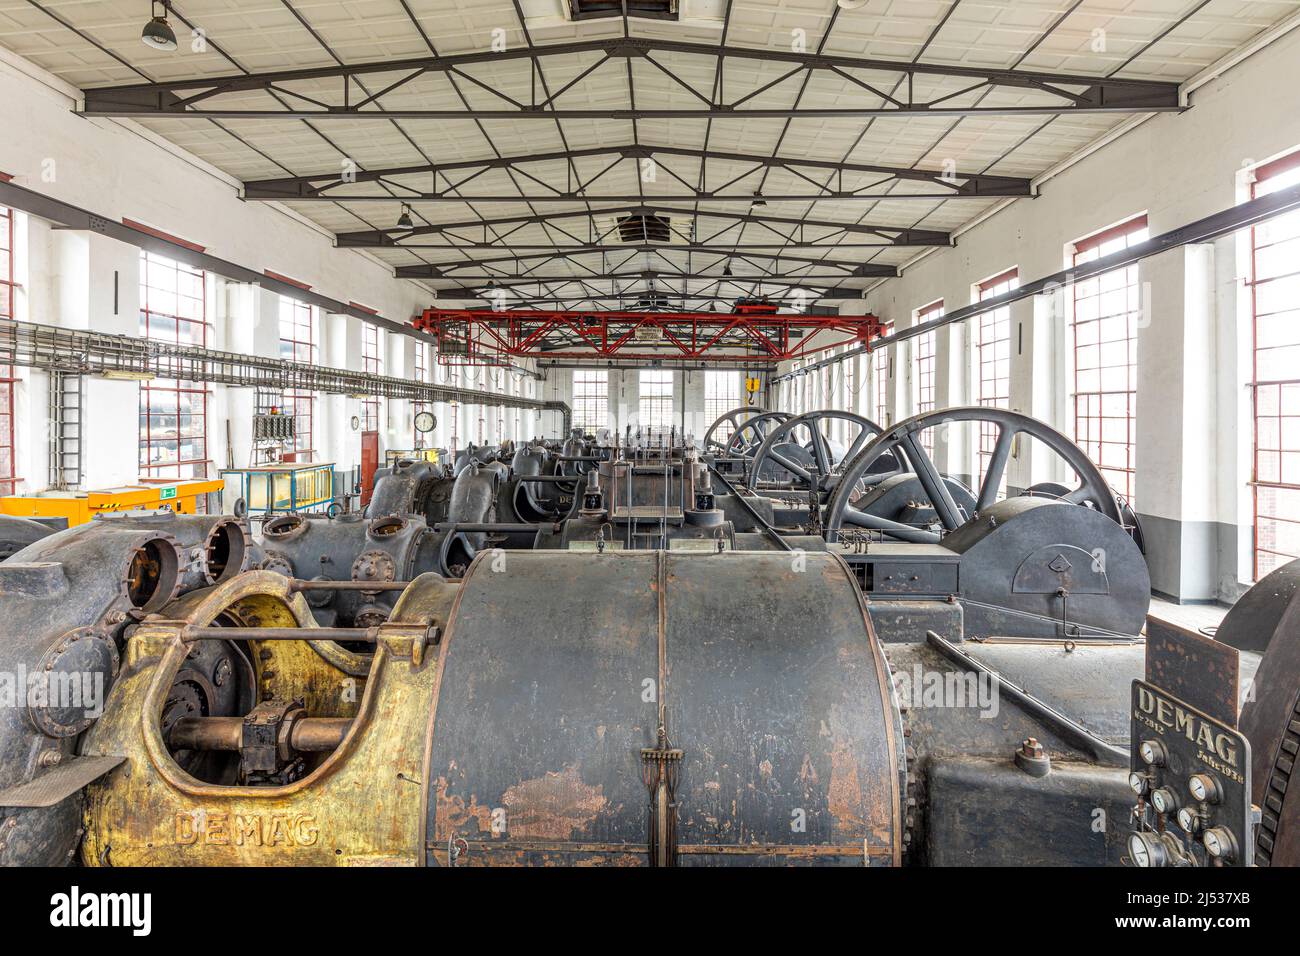 Dortmund, Germany - February 2, 2018: the Hansa coking plant in Dortmund, Germany, today a museum, industrial monument in Germany Stock Photo